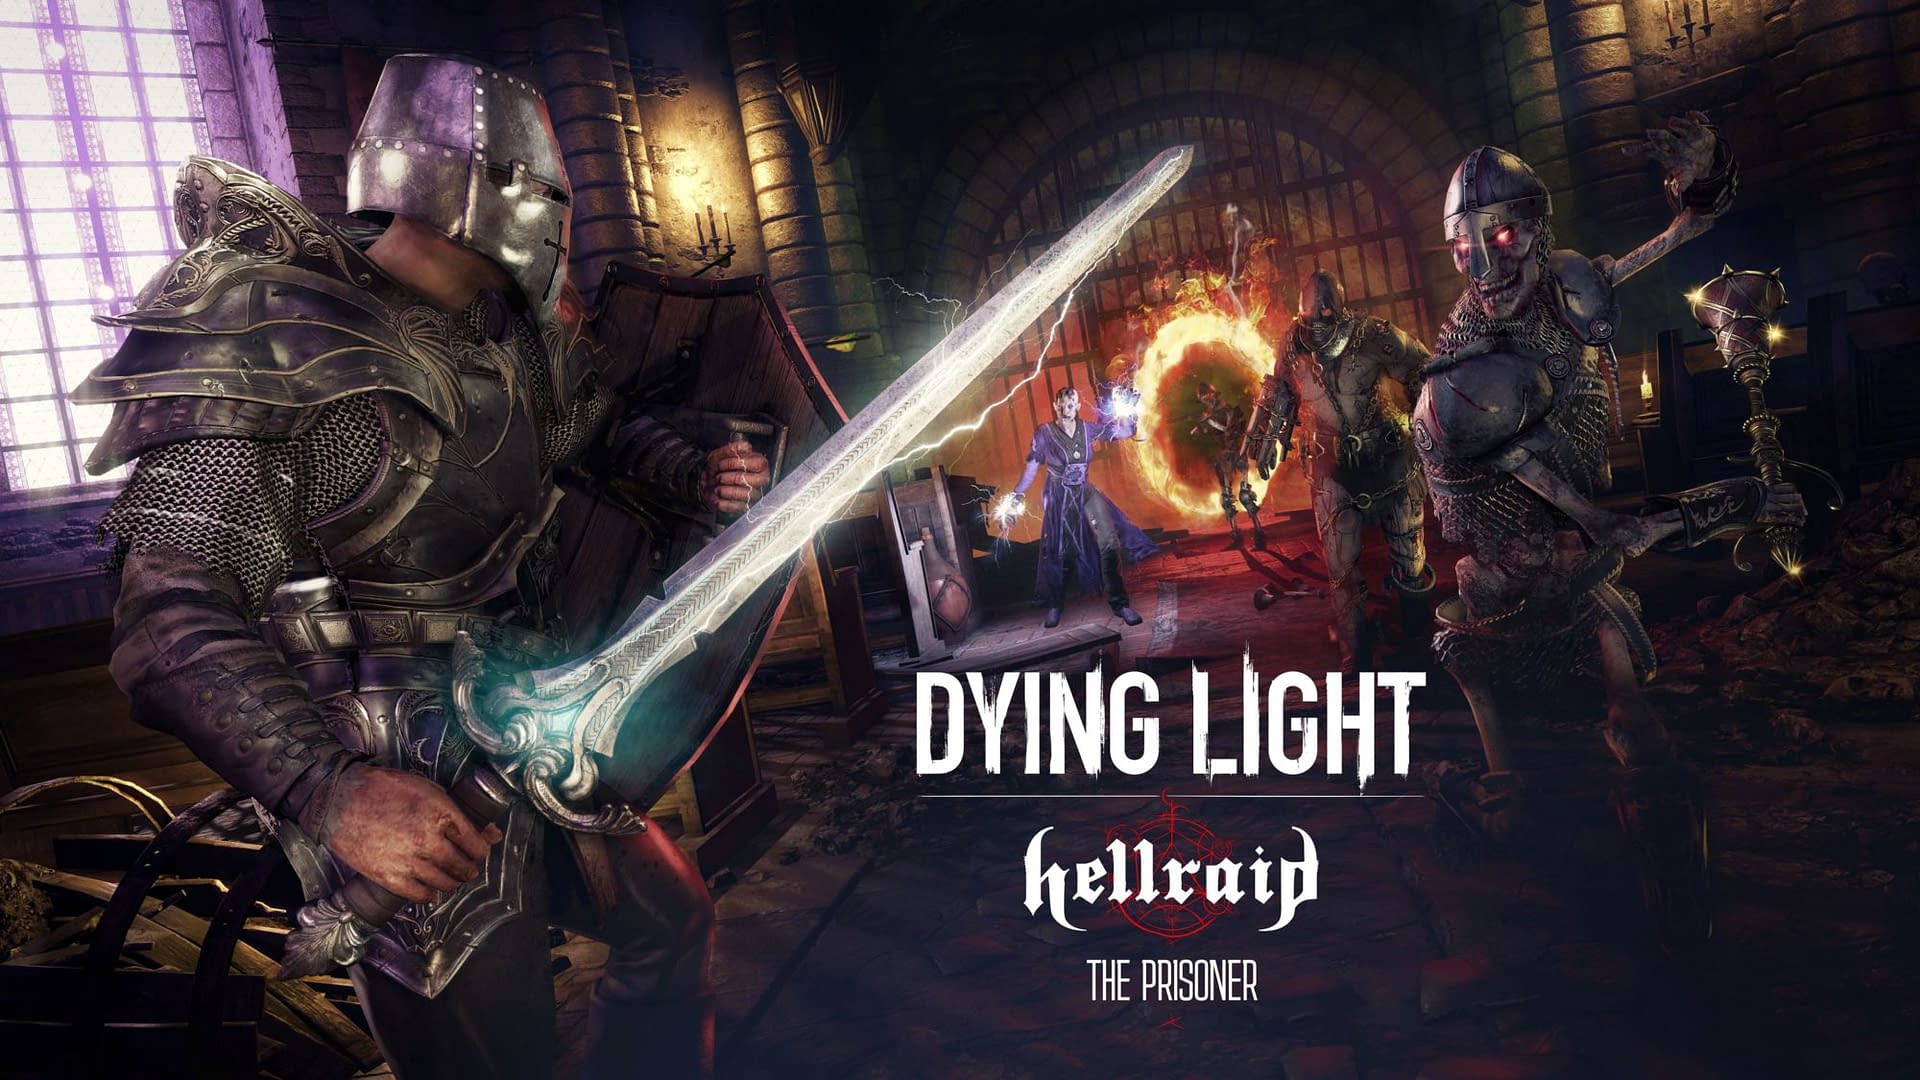 Dying Light: Hellraid Gets New Story Mode With Free